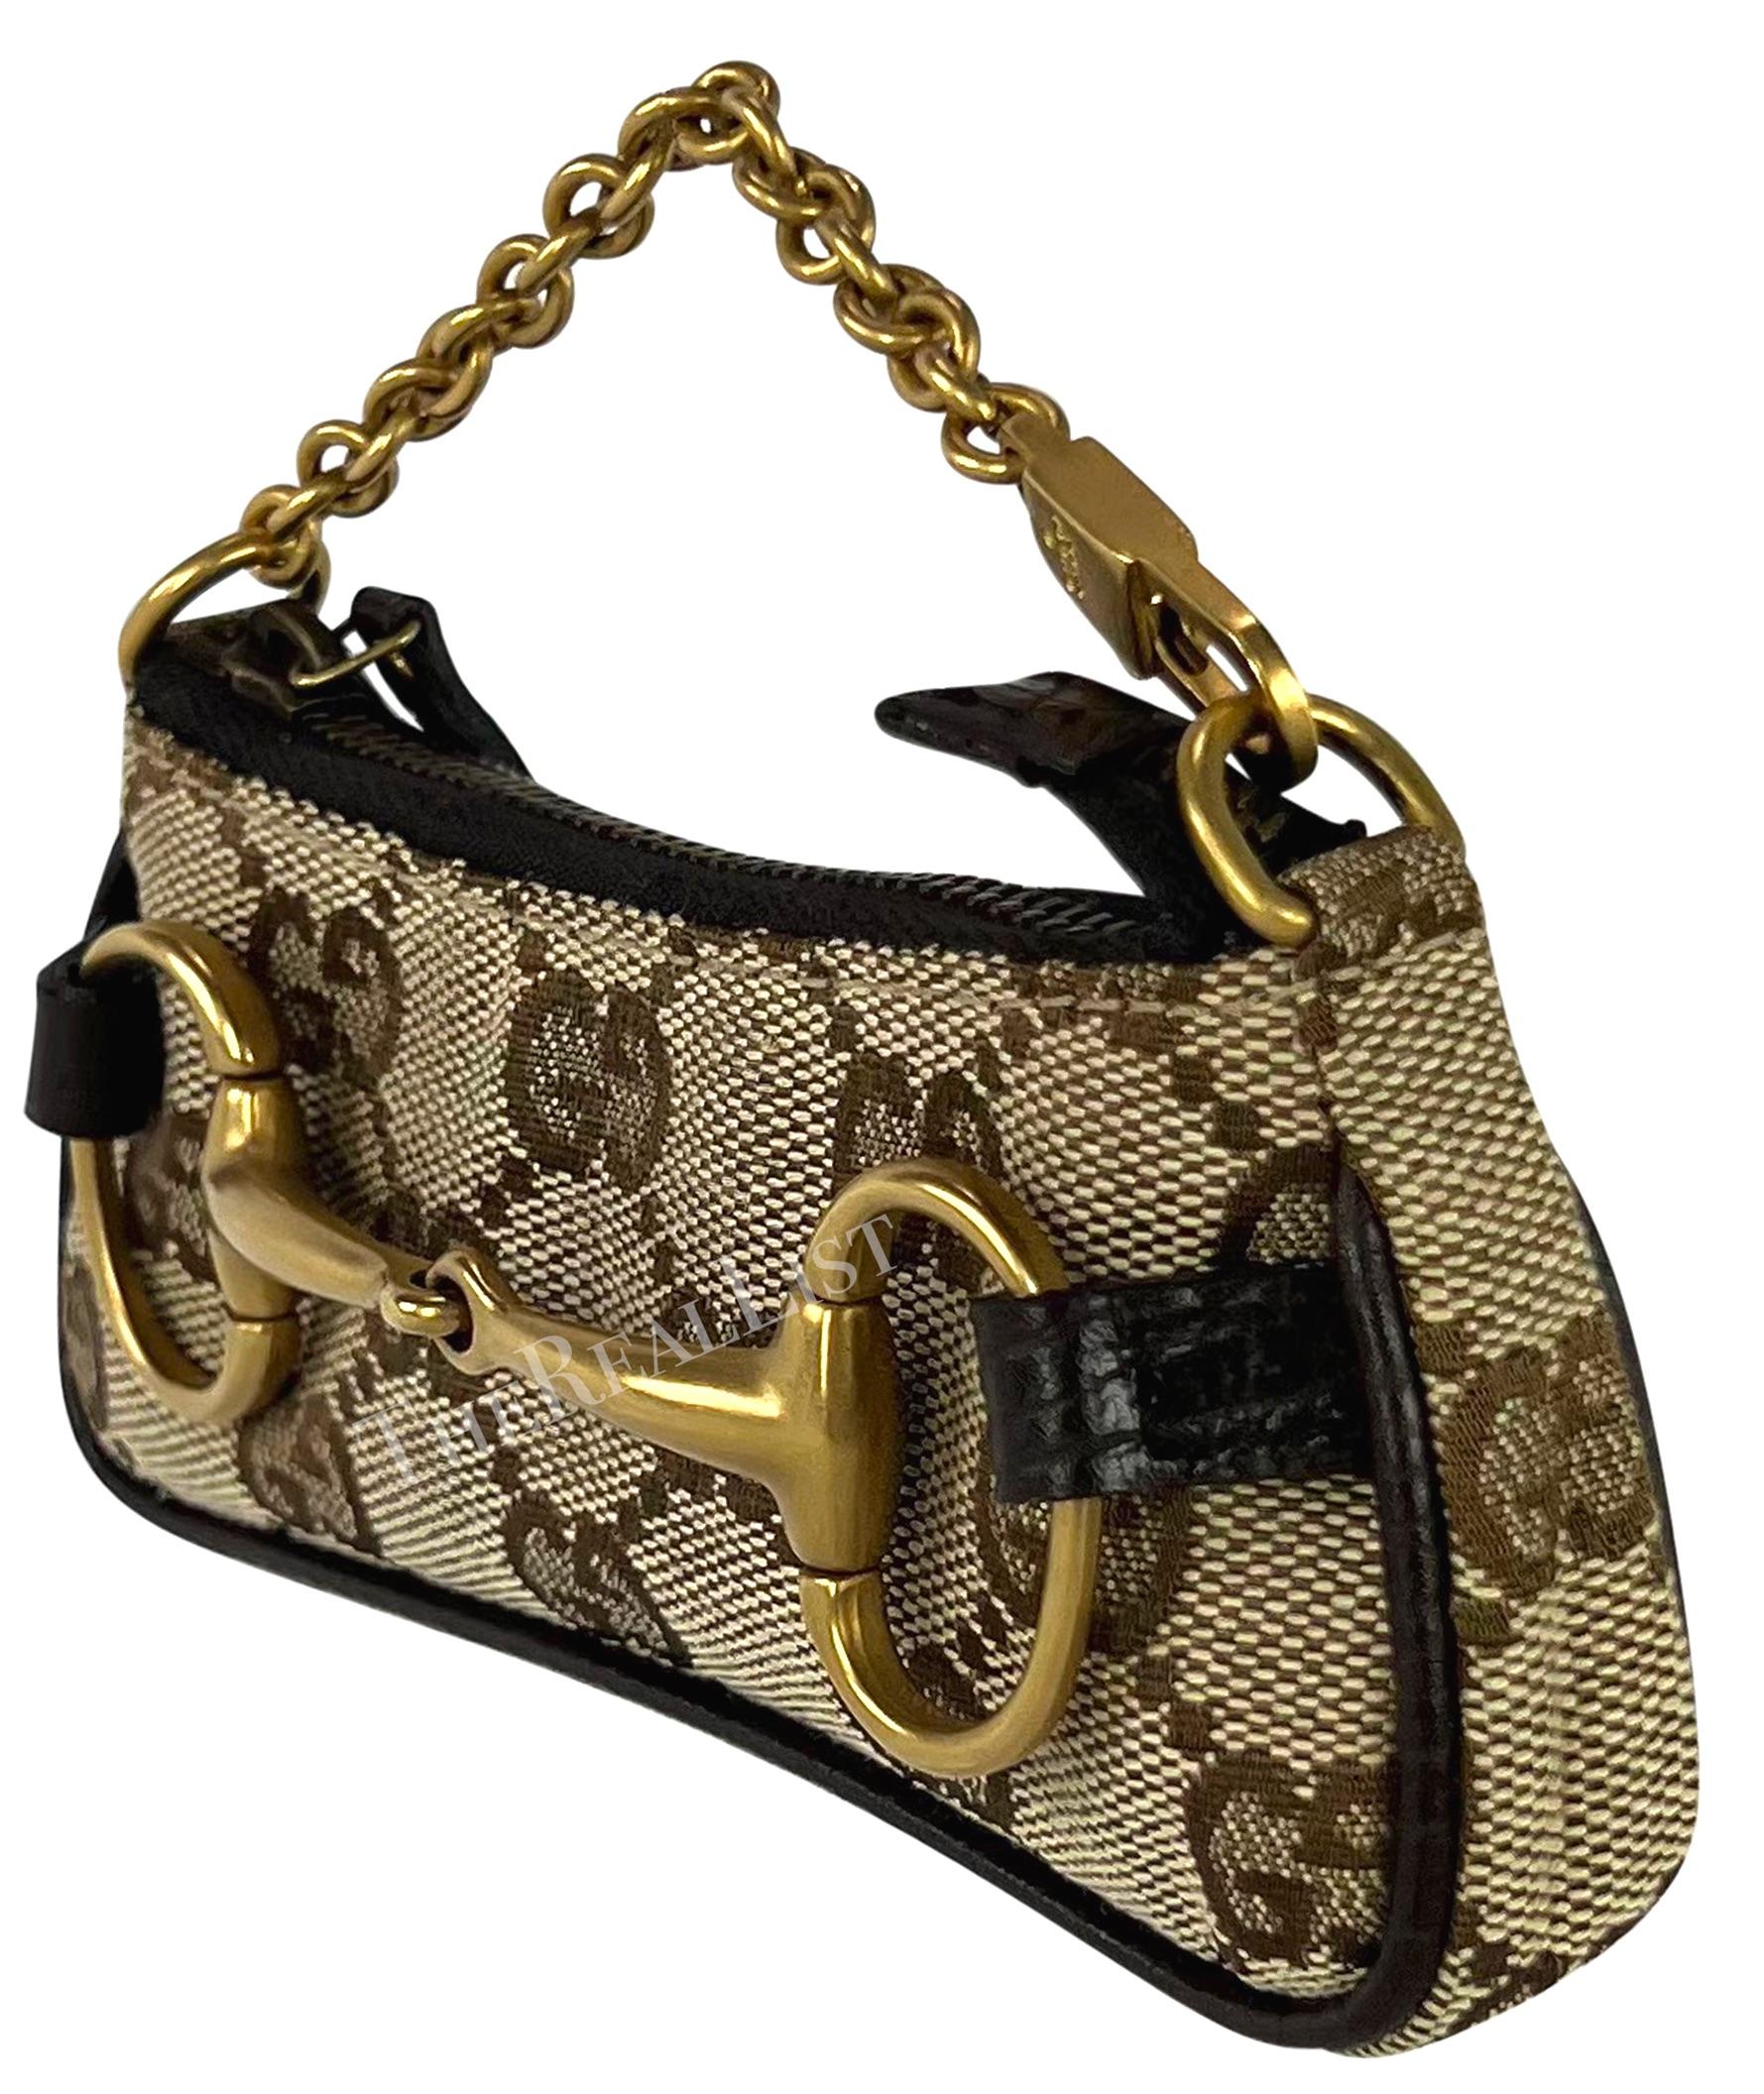 Presenting a petite brown Gucci monogram canvas horse-bit bag/coin purse designed by Tom Ford from the early 2000s. This fabulous micro bag embodies Ford’s iconic horse bit style shoulder bag, a design that has recently been reintroduced.The bag can